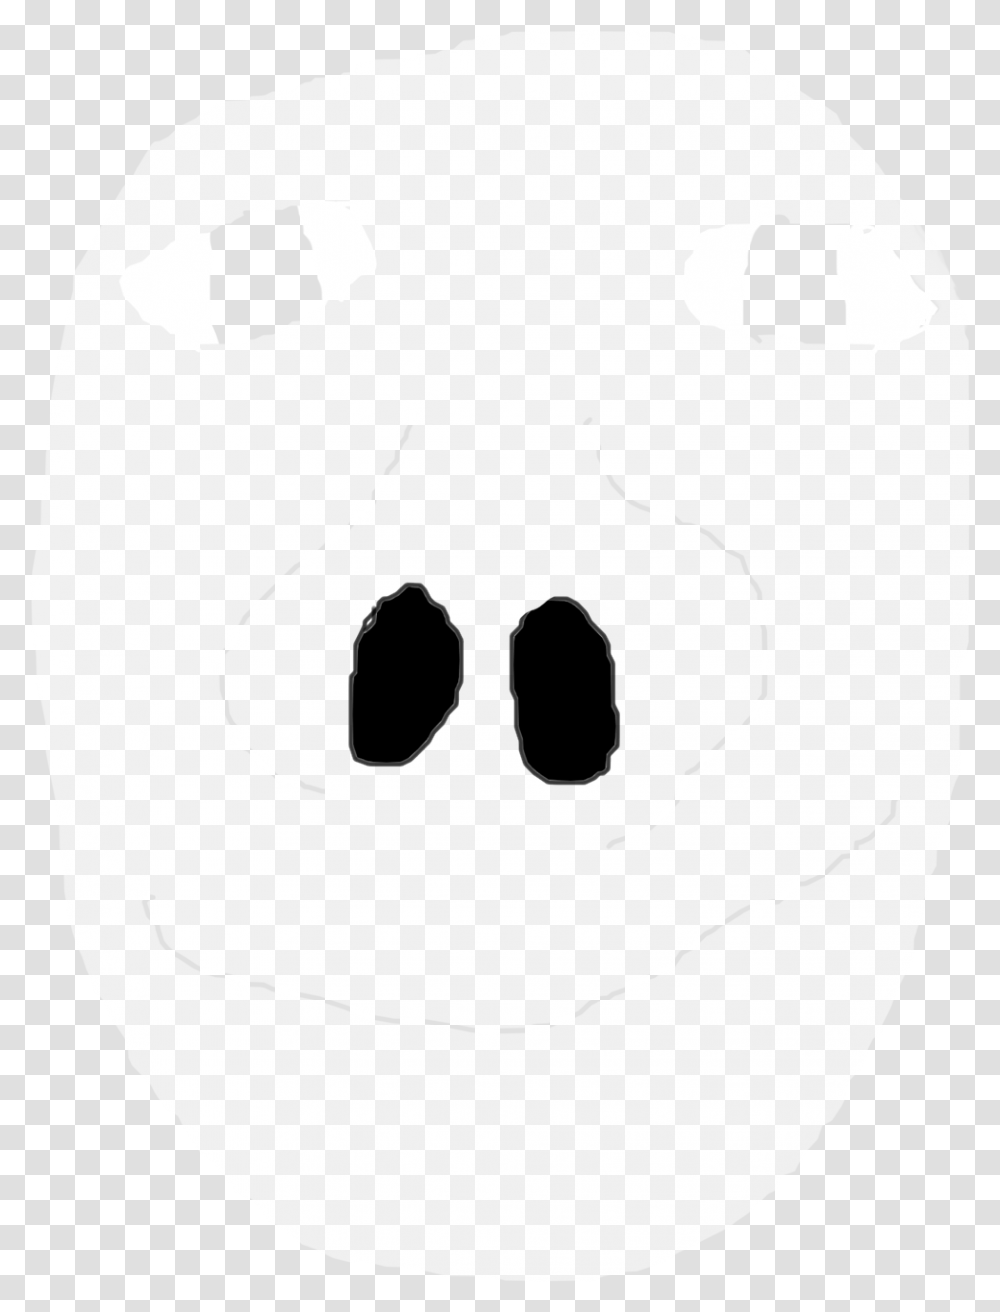 Click N Drag For A Spooky Ghost Sketch, Stencil Transparent Png